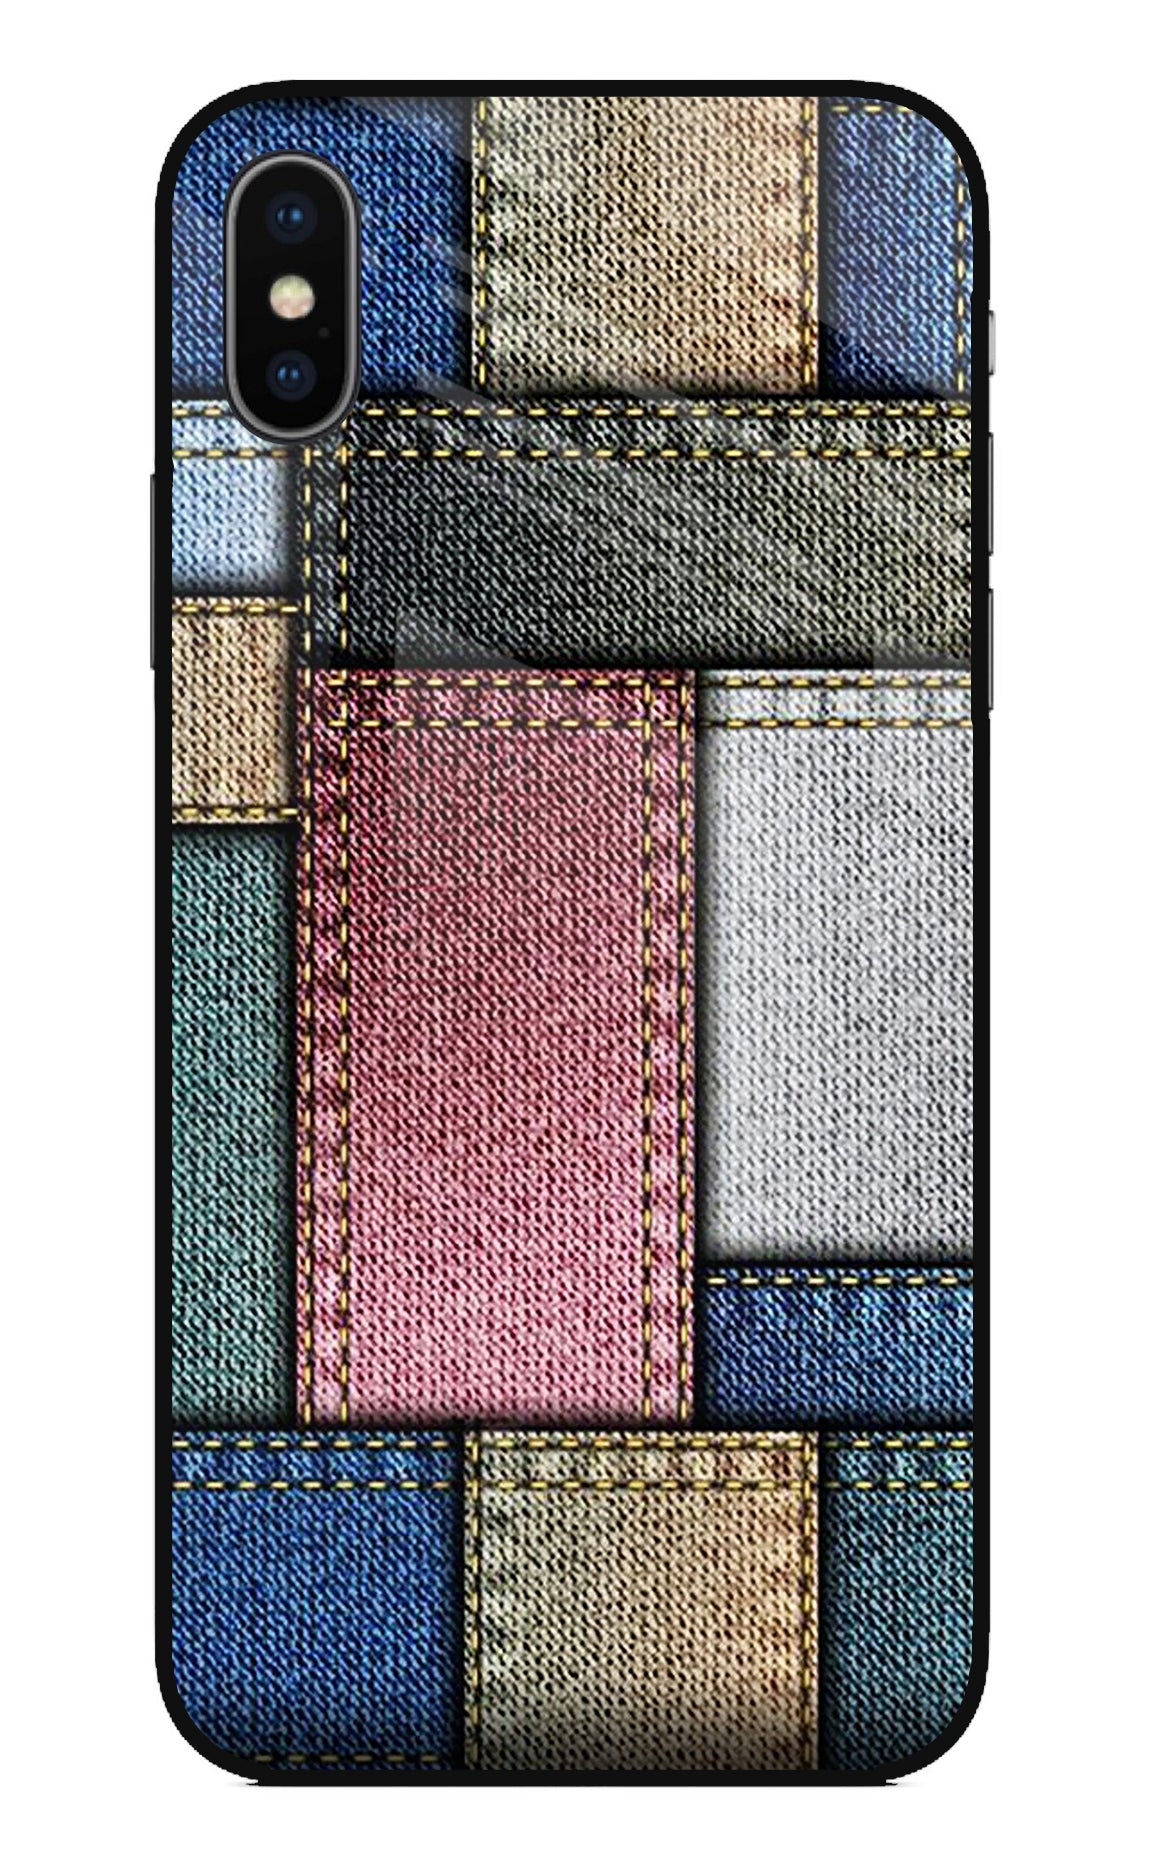 Multicolor Jeans iPhone X Back Cover